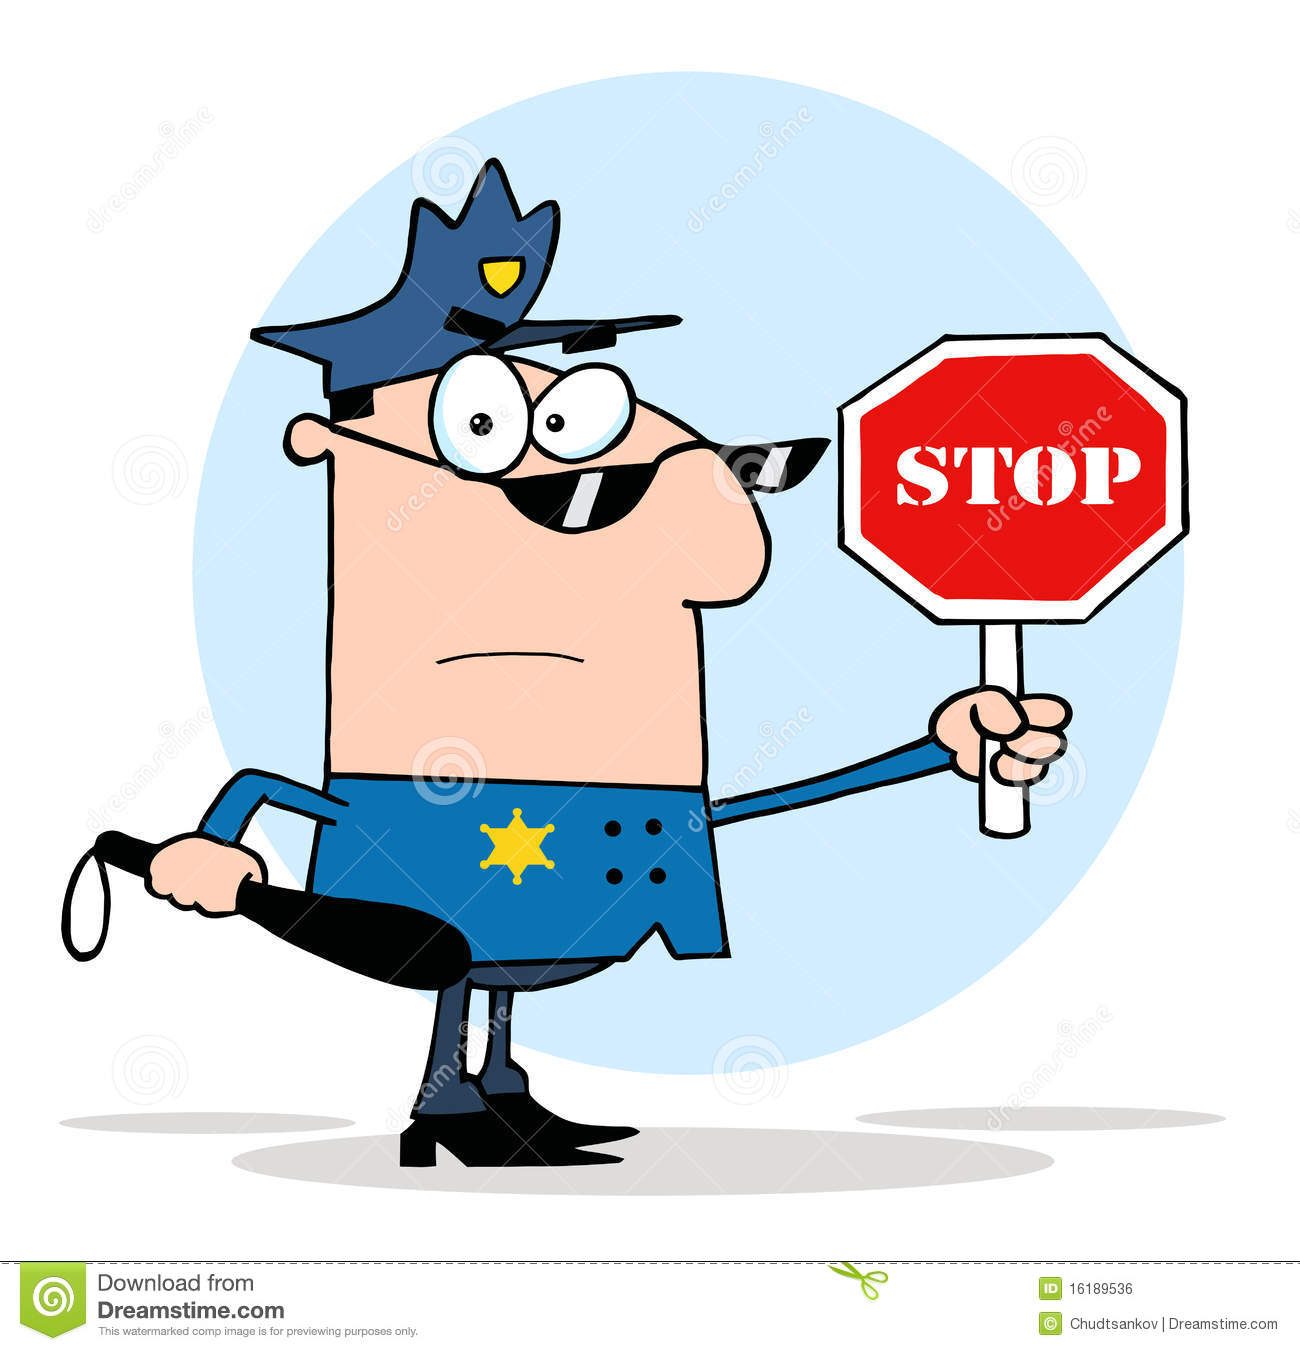 Traffic Police Officer Royalty Free Stock Image   Image  16189536